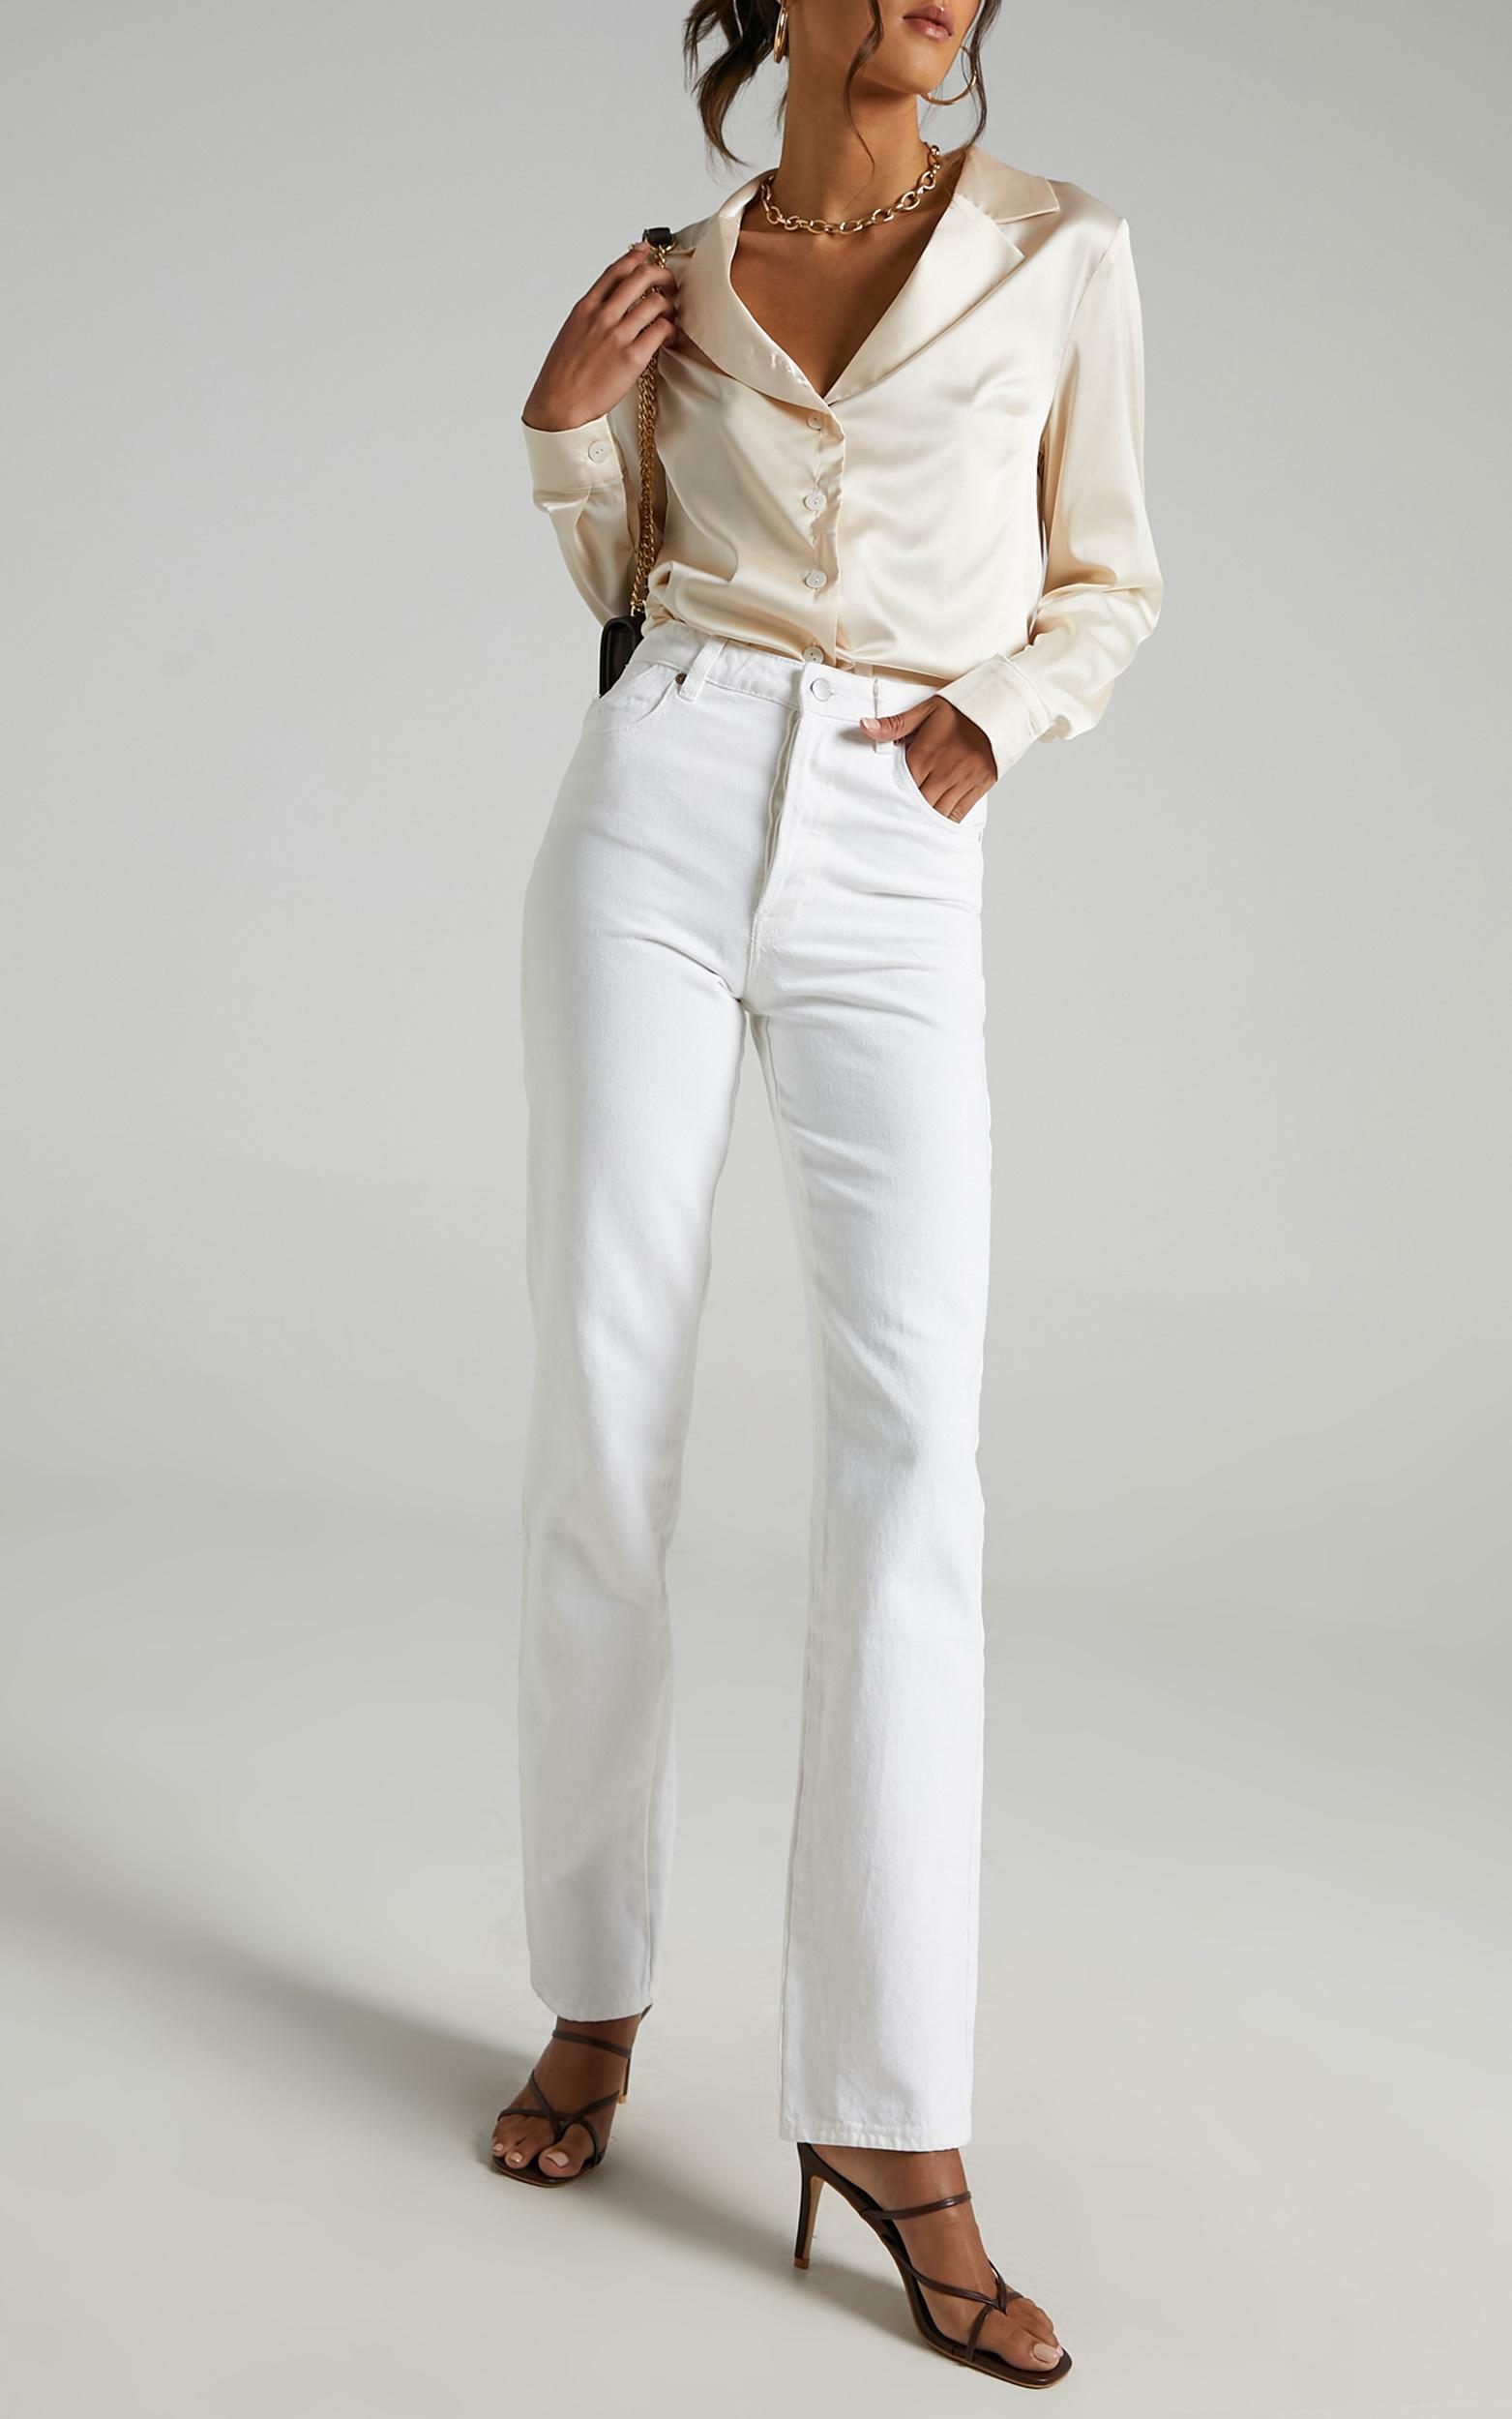 Rolla's - Classic Straight Jean in Vintage White - 06, WHT1, hi-res image number null